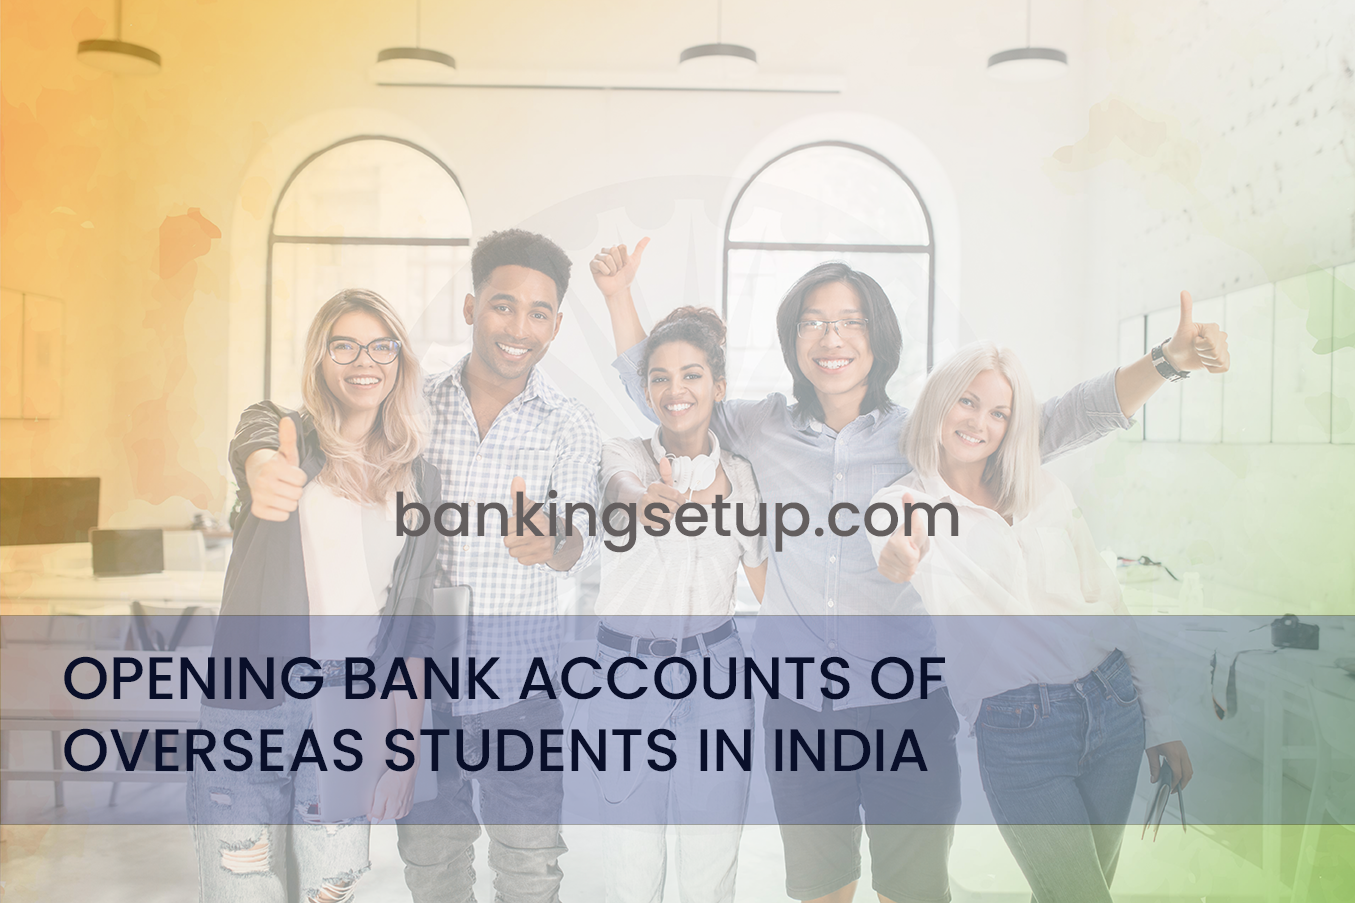 OPENING BANK ACCOUNTS OF OVERSEAS STUDENTS IN INDIA